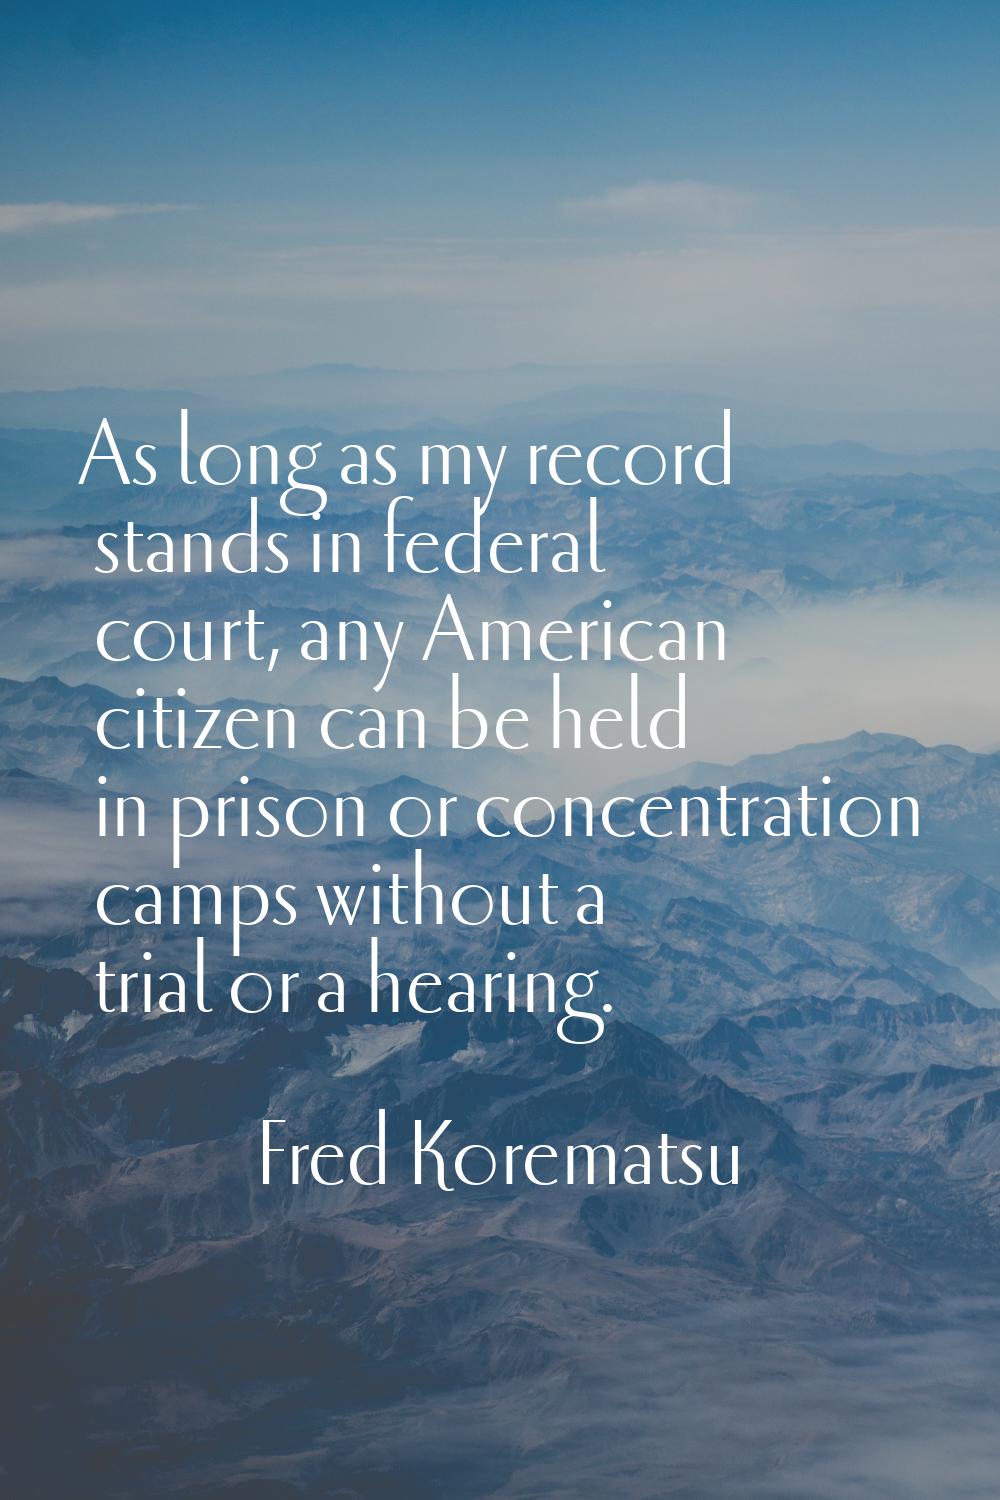 As long as my record stands in federal court, any American citizen can be held in prison or concent